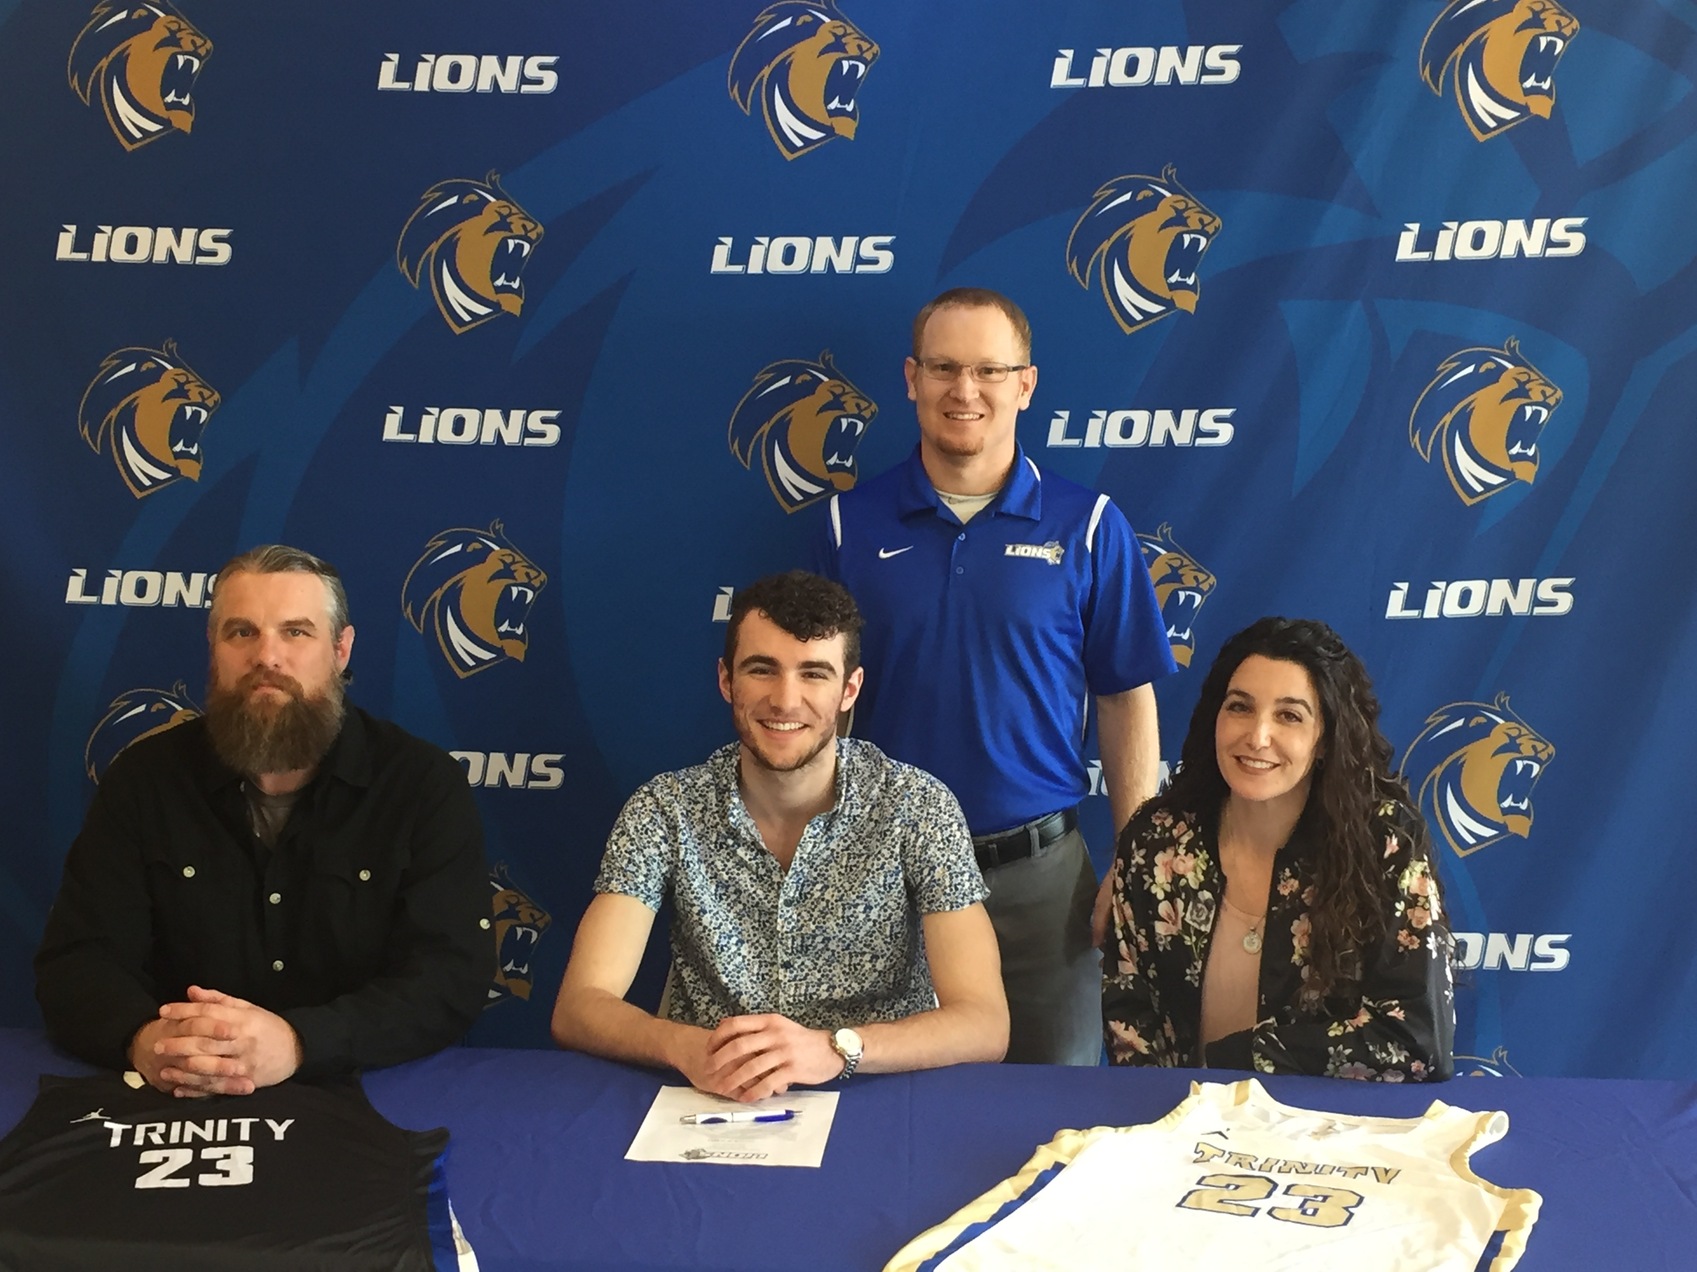 Lions Sign EHS All-State Guard Molan